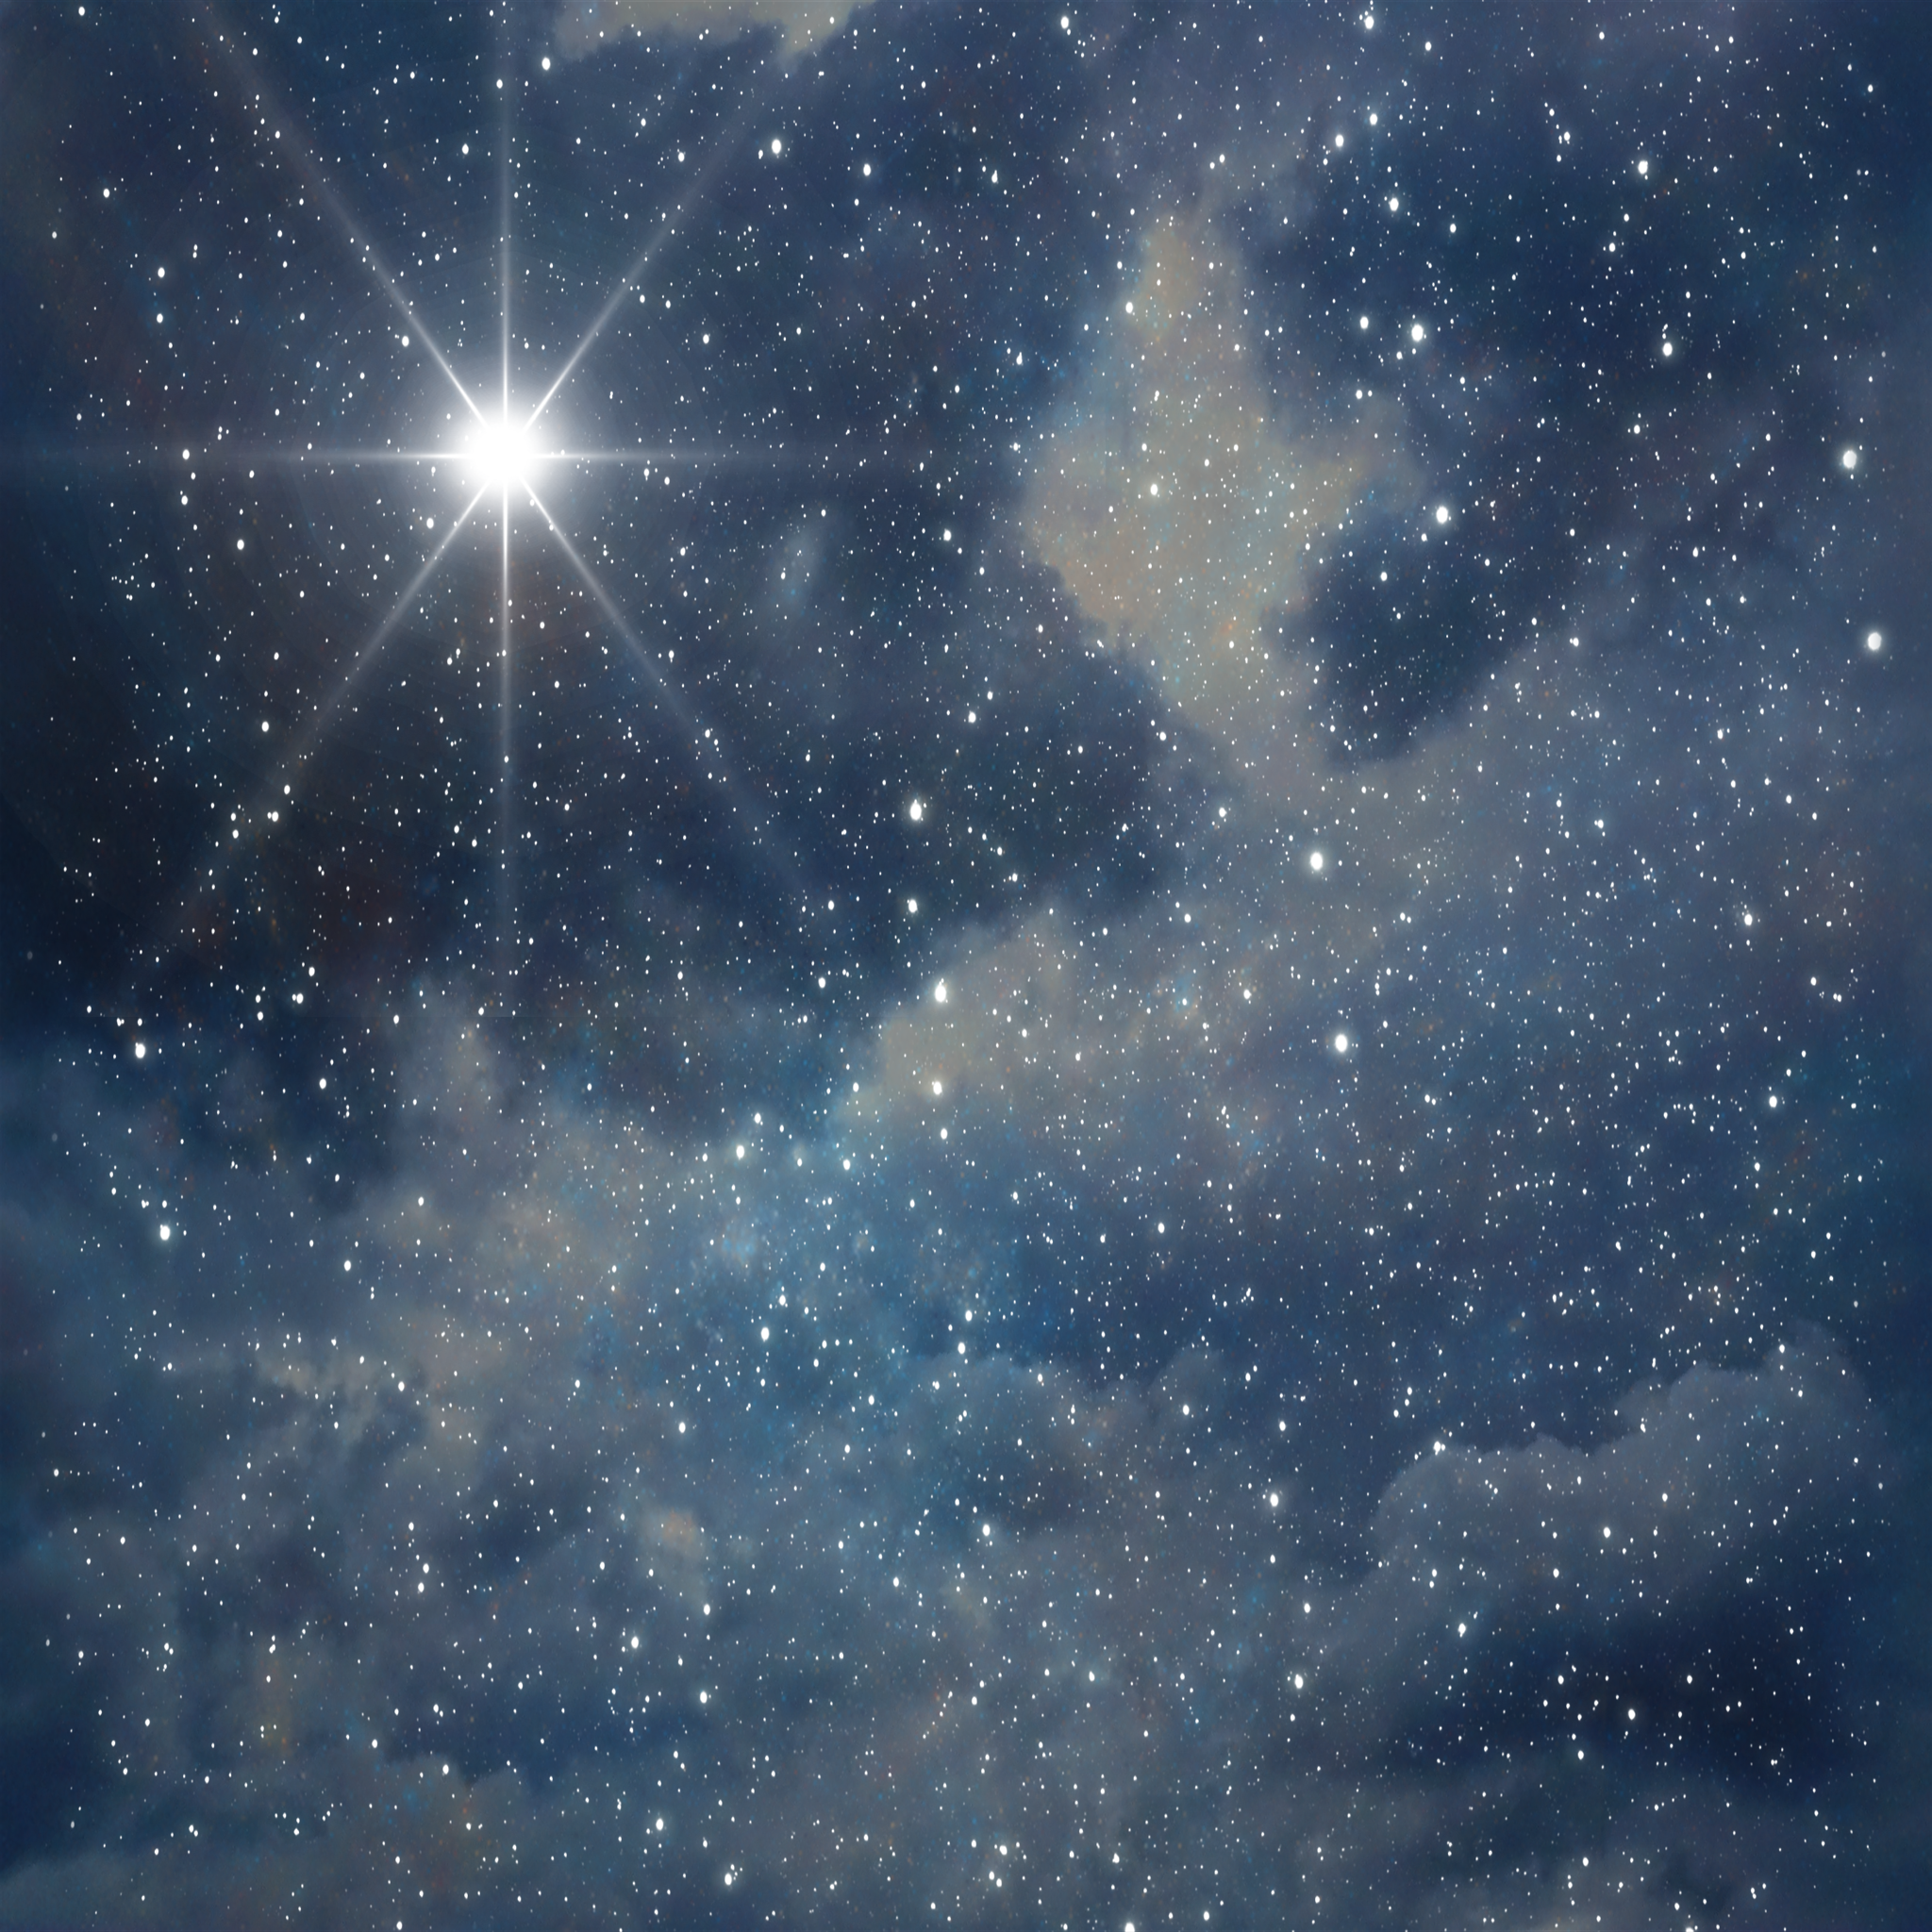 Background Night Sky By Templep2k2 On DeviantArt Graphic